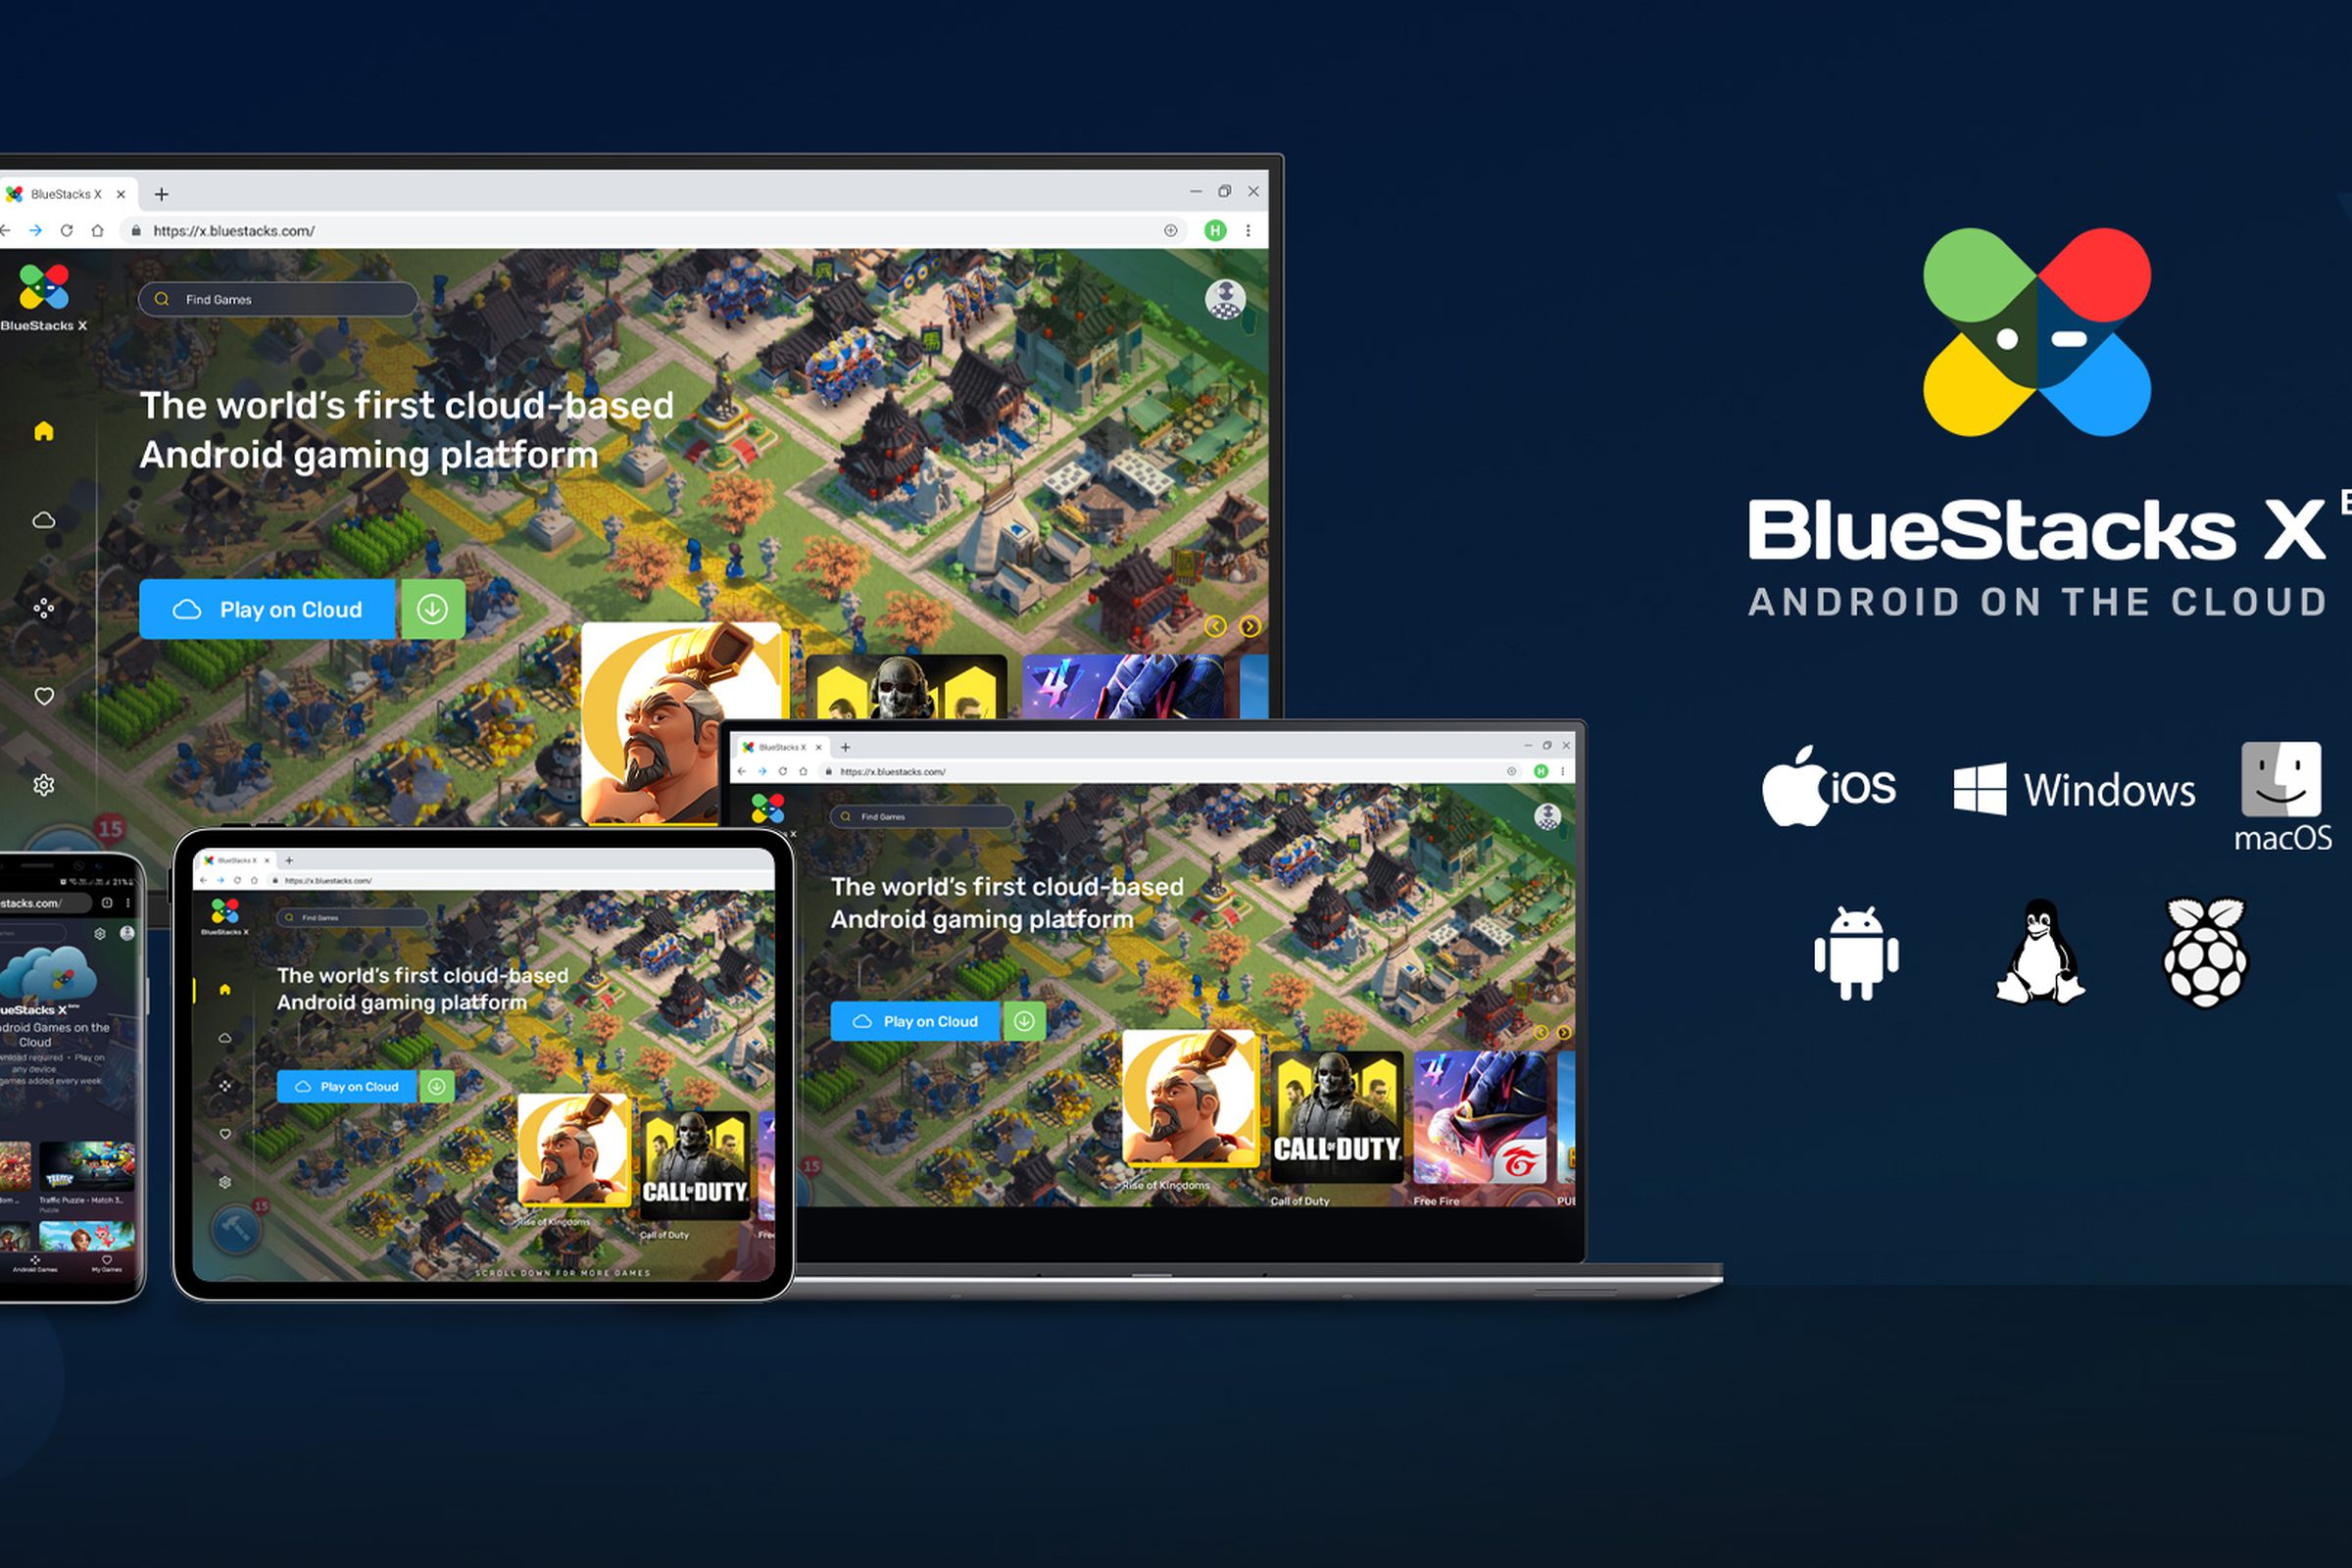 Bluestacks X brings Android games to the browser.